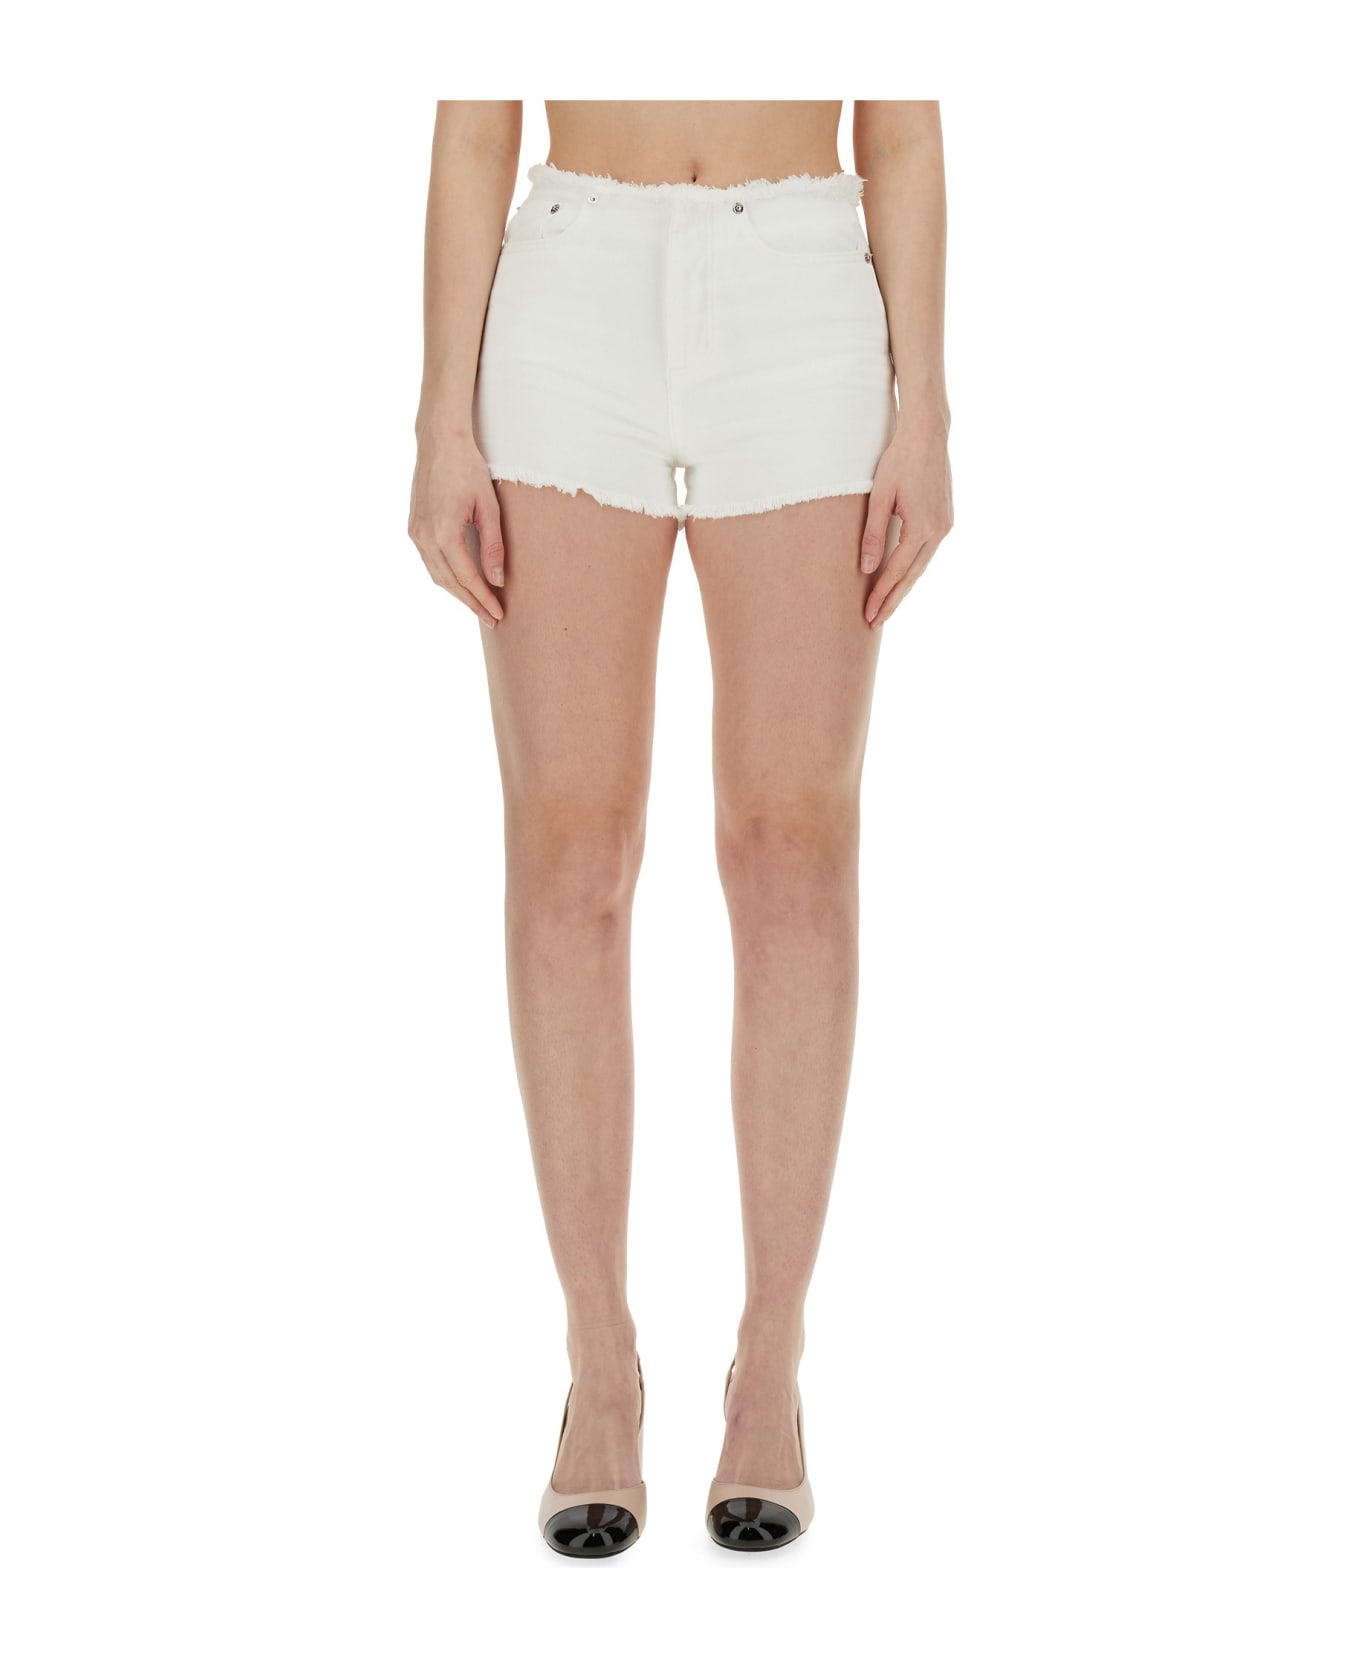 Michael Kors Buttoned Fitted Shorts - BIANCO